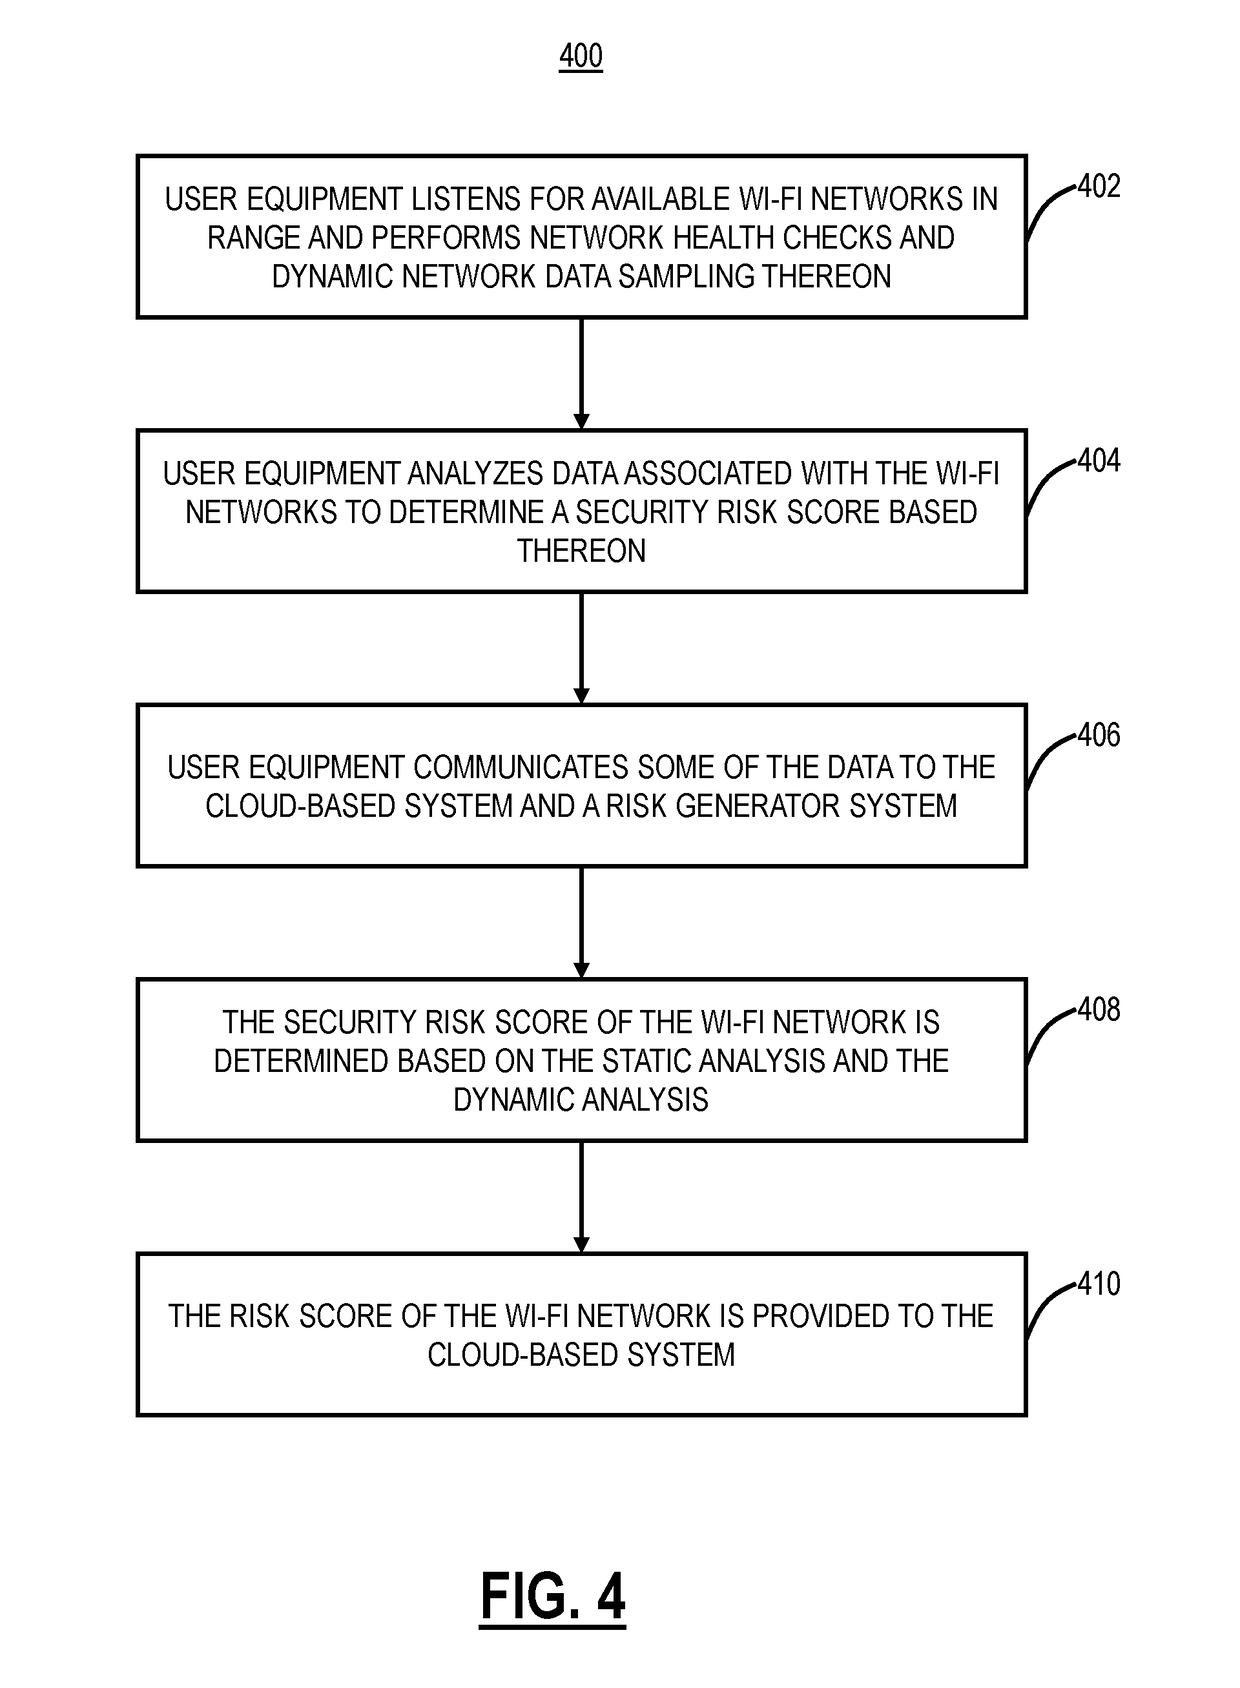 Systems and methods for network vulnerability assessment and protection of wi-fi networks using a cloud-based security system